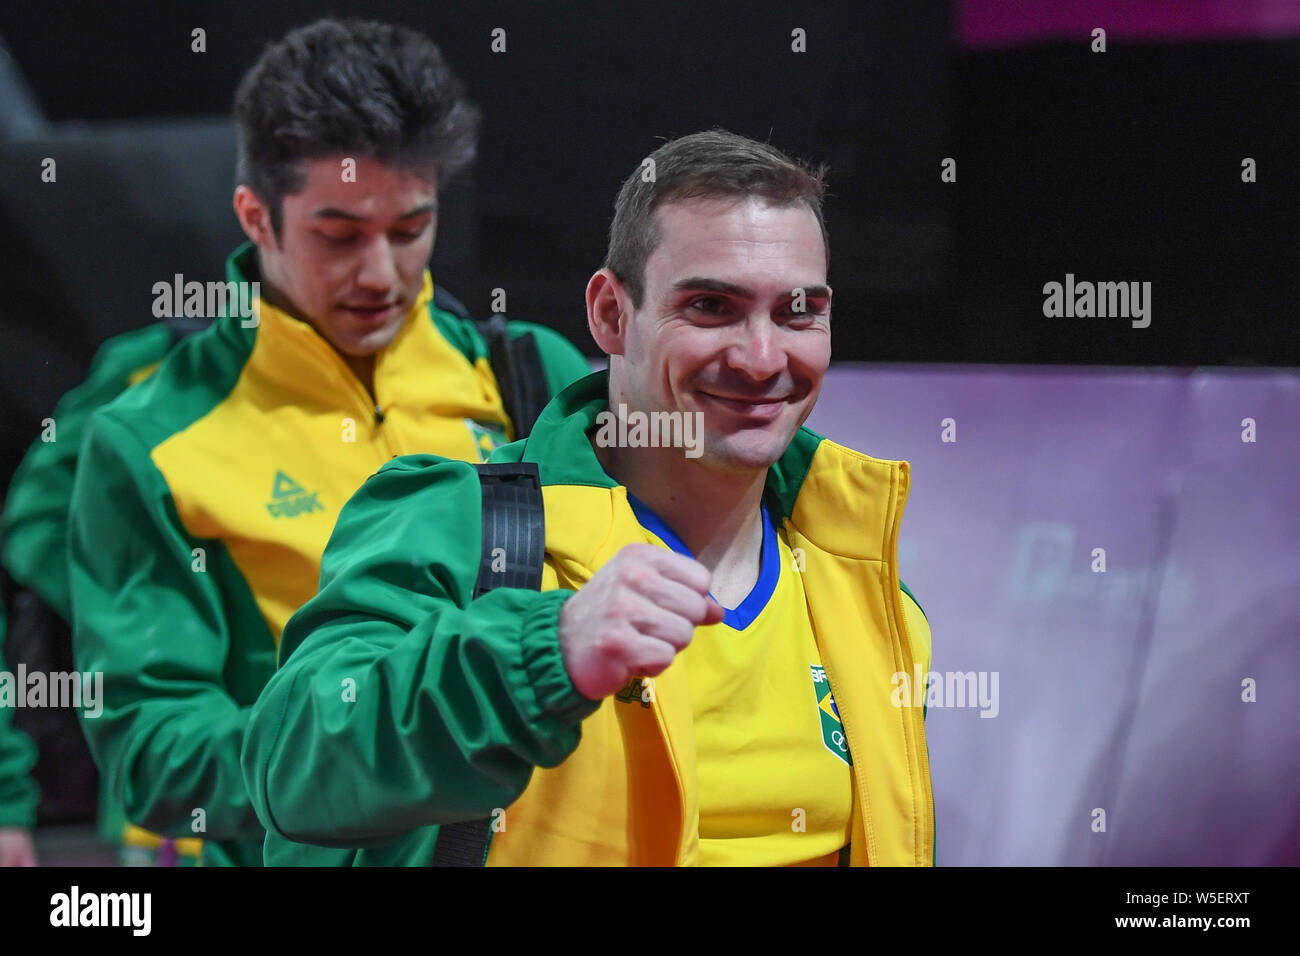 Lima, Peru. 28th July, 2019. ARTHUR ZANETTI from Brazil gestures to someone after competing in the team finals competition held in the Polideportivo Villa El Salvador in Lima, Peru. Credit: Amy Sanderson/ZUMA Wire/Alamy Live News Stock Photo